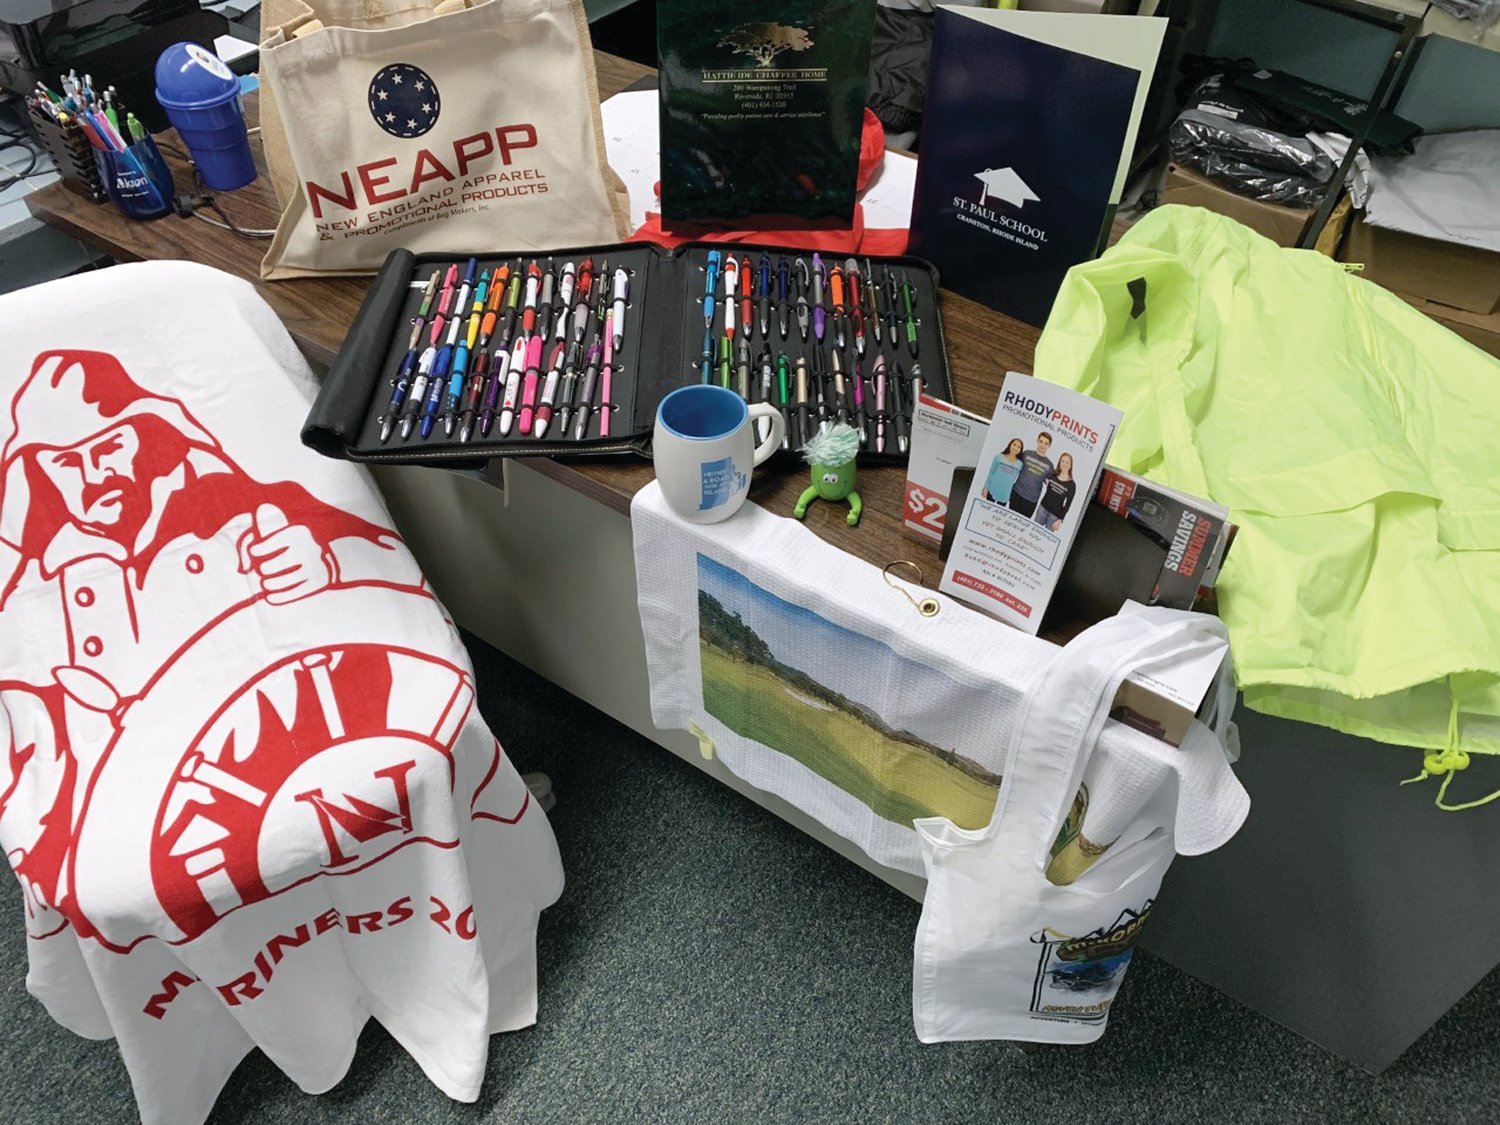 Check out some of the many promotional products that will give your business the visibility it needs to grow this winter. Contact Bob Giberti at RhodyPrints Promotional Products to learn more.